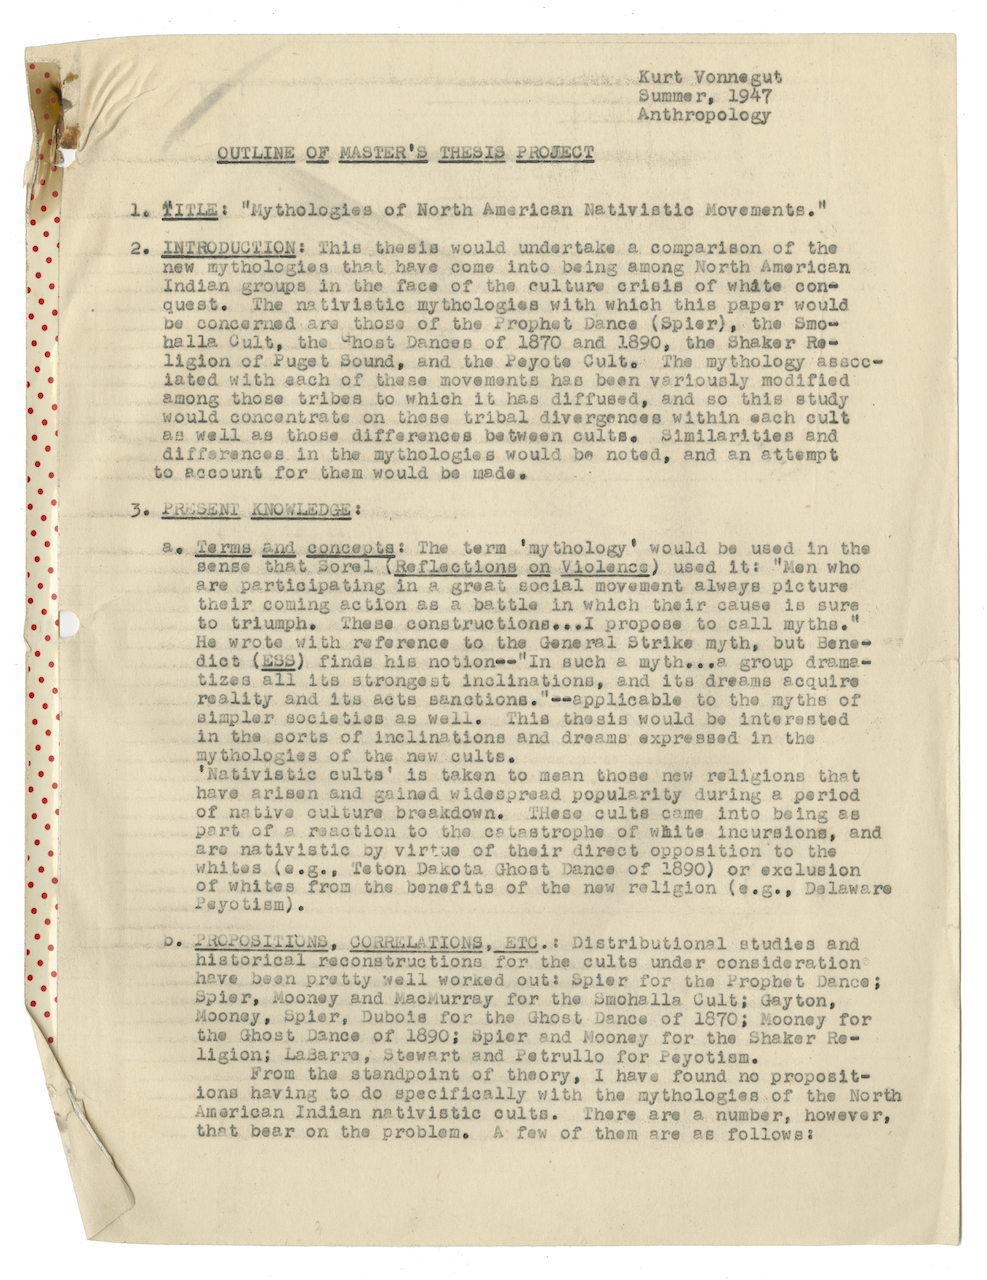 Outline of Master’s Thesis Project, “Mythologies of Native American Movements,” Summer of 1947.